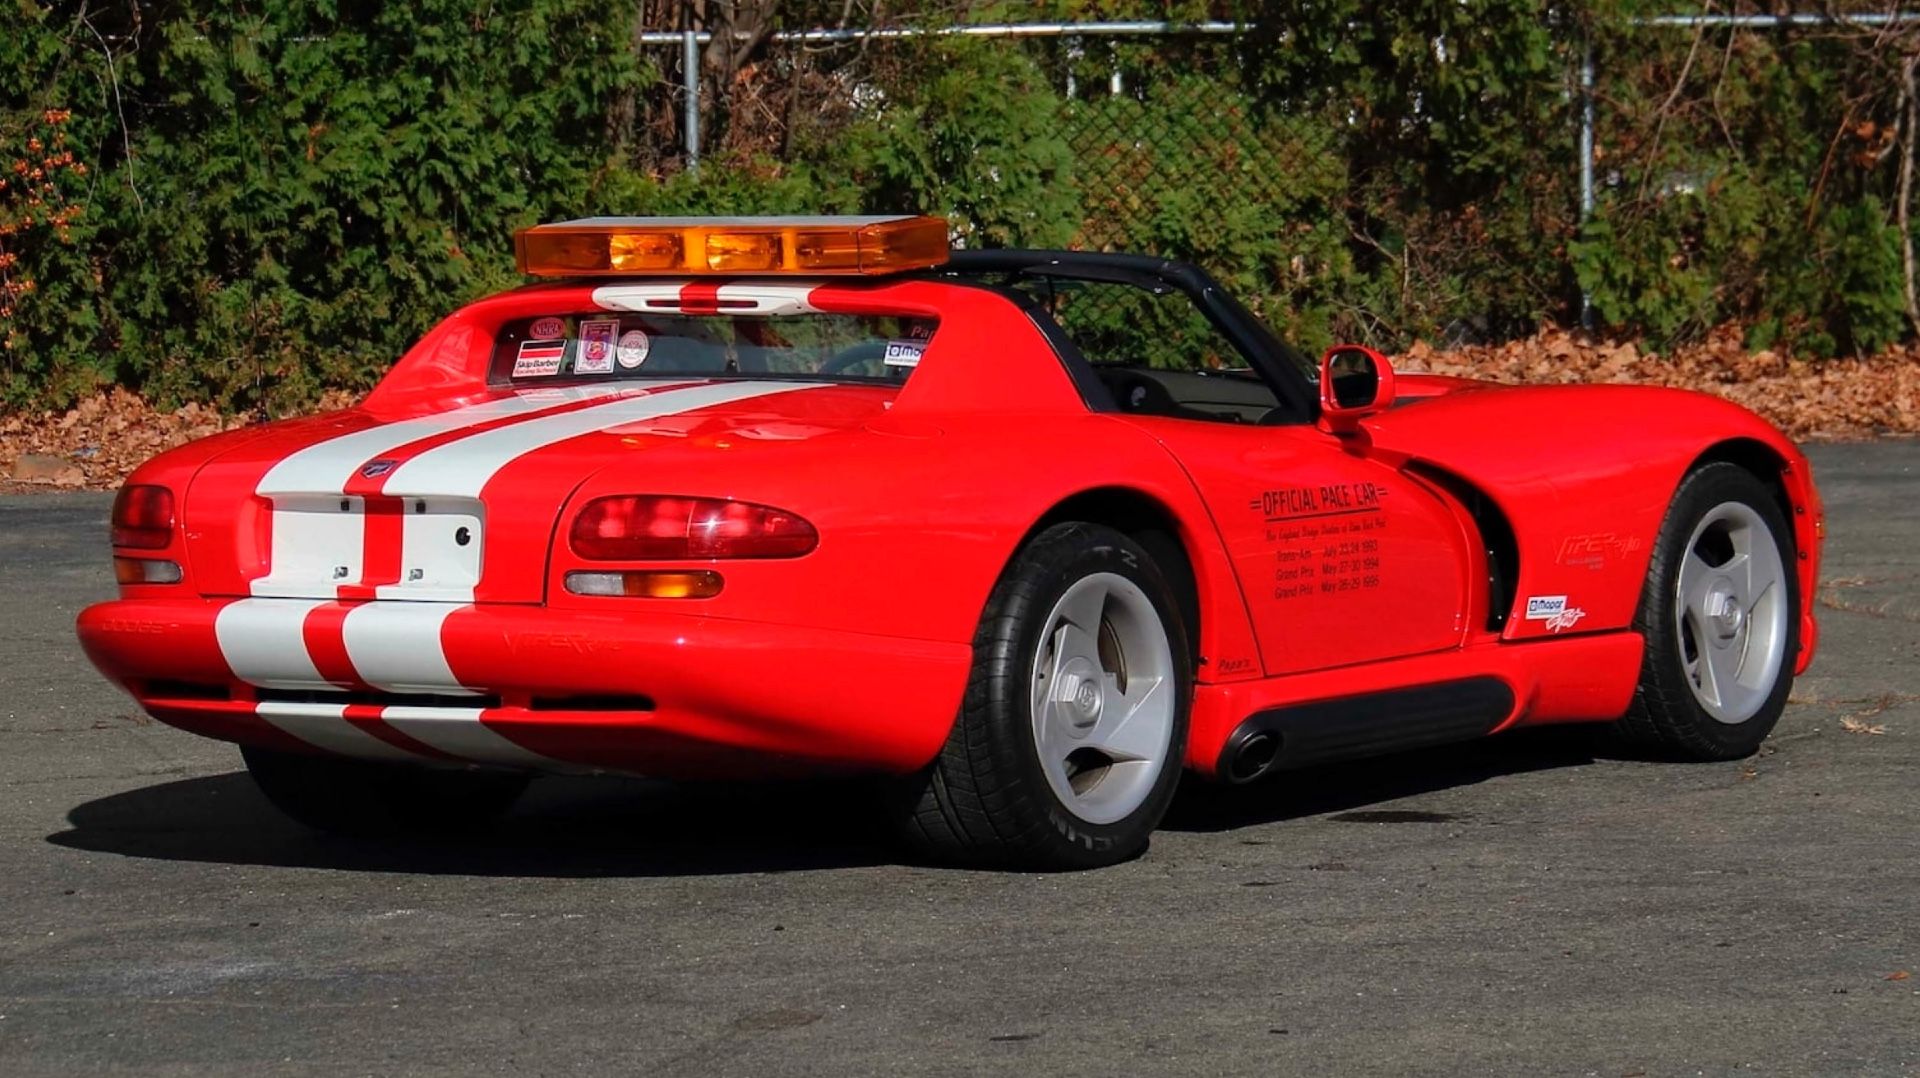 Red 1993 Dodge Viper RT/10 Callaway 440 Pace Car Rear View